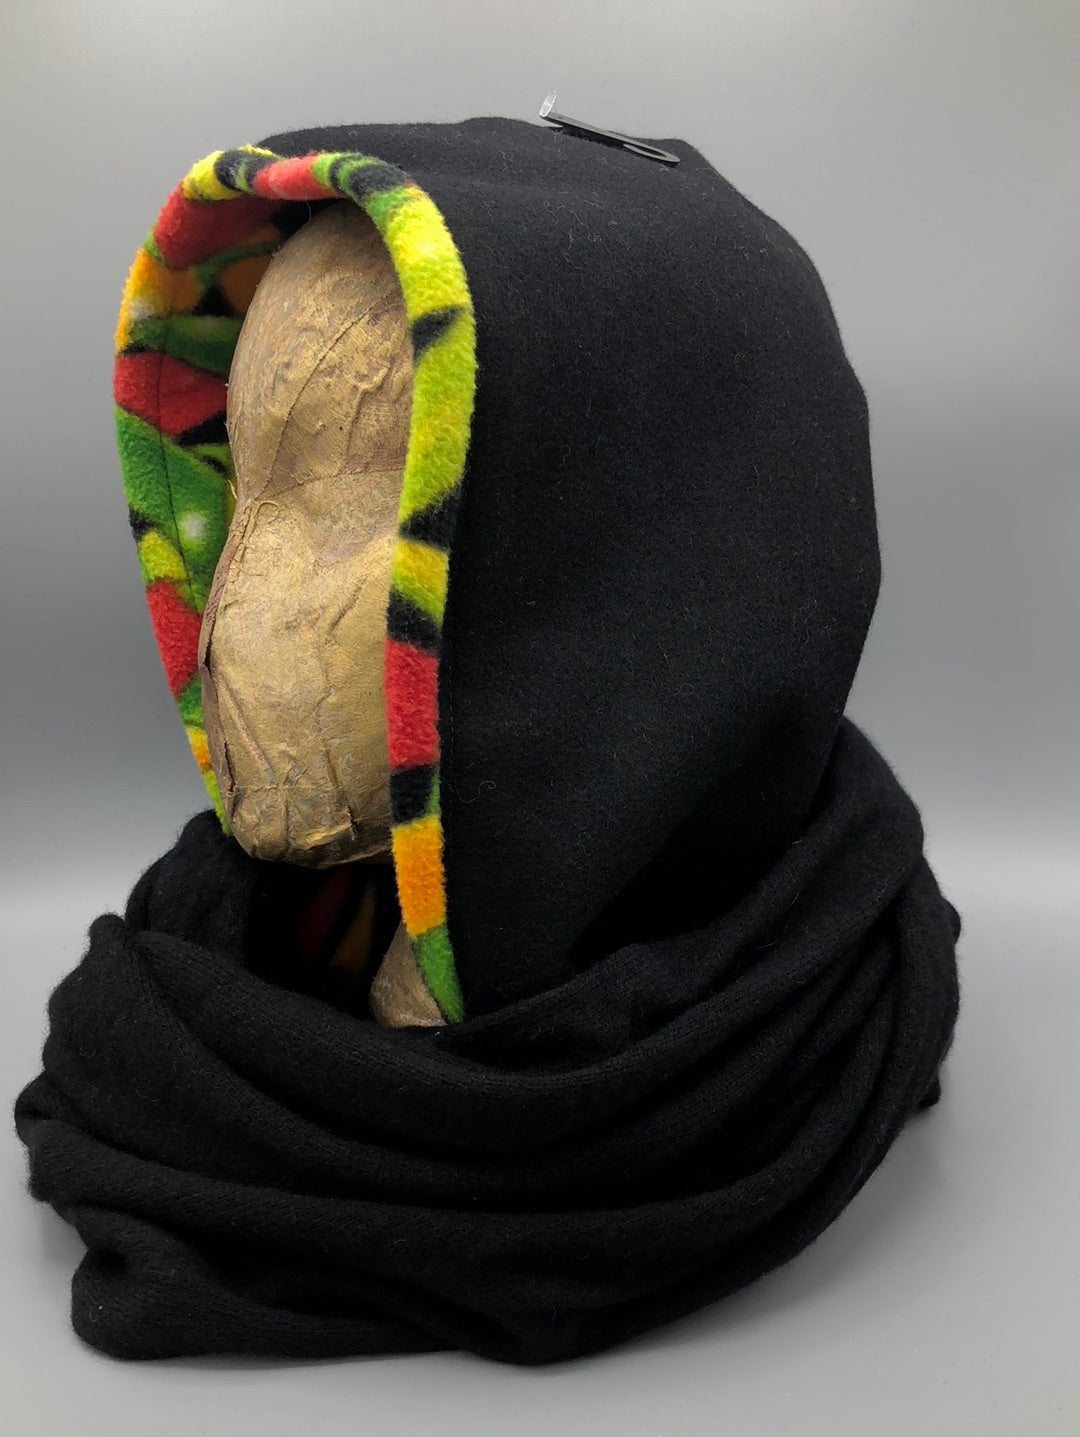 Black Wool Hood with Colorful Hot Pepper Fleece Liner and Black Casmere Circular scarf